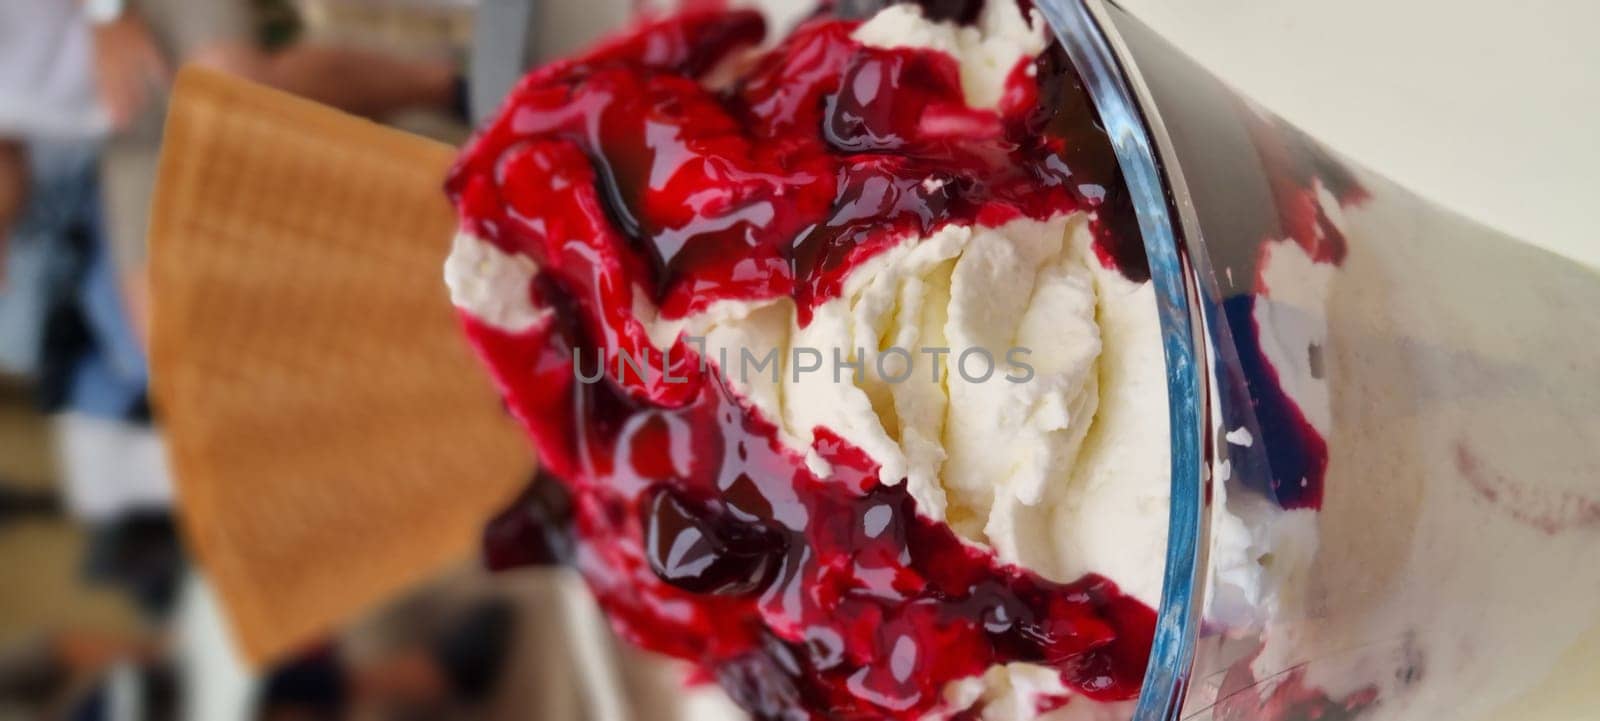 Close-up of a delicious cherry sundae with whipped cream in a dessert glass